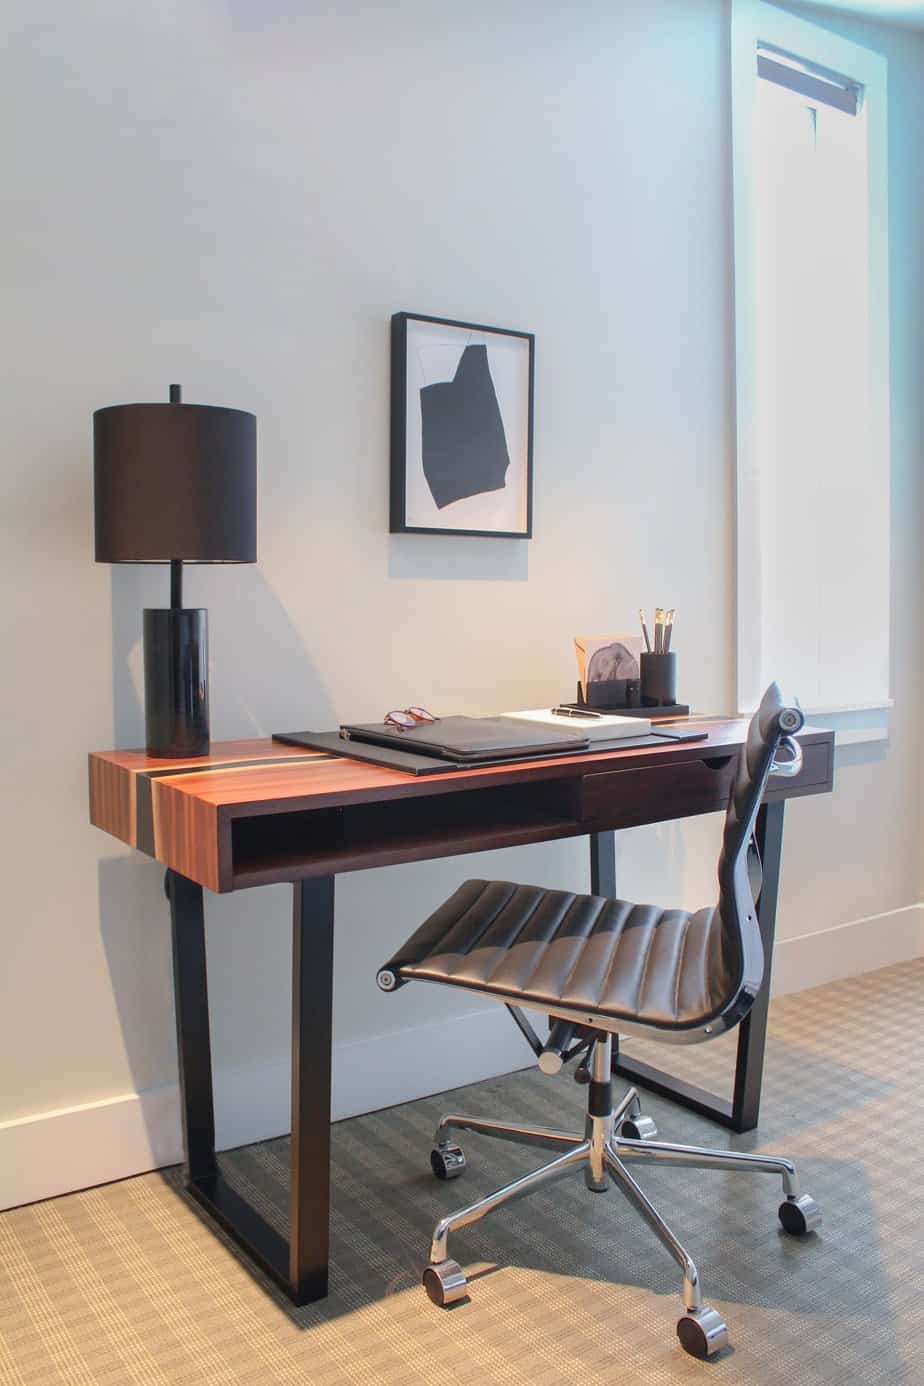 Designated work space with desk in bespoke suite for clients in addiction treatment who cannot take time away from work.